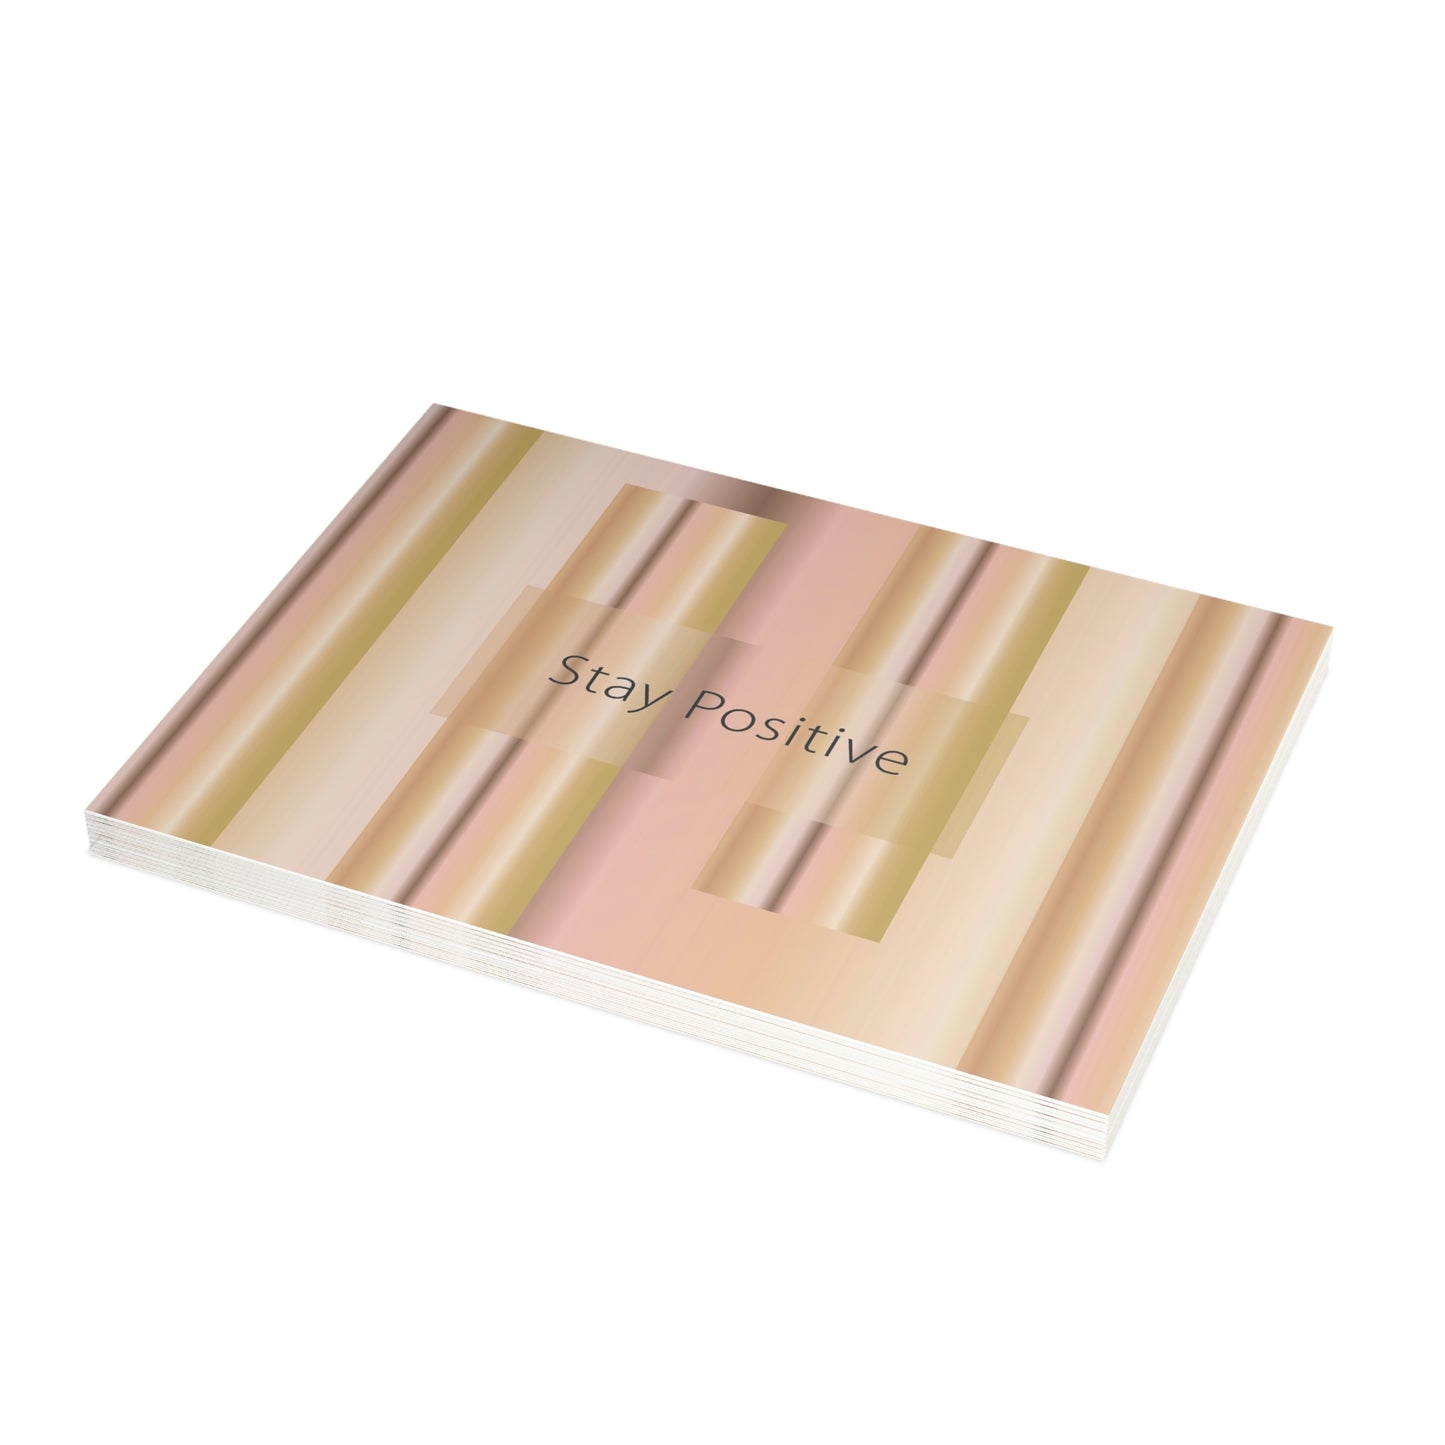 Unfolded Greeting Cards Horizontal (10, 30, and 50pcs) Stay Positive - Design No.100